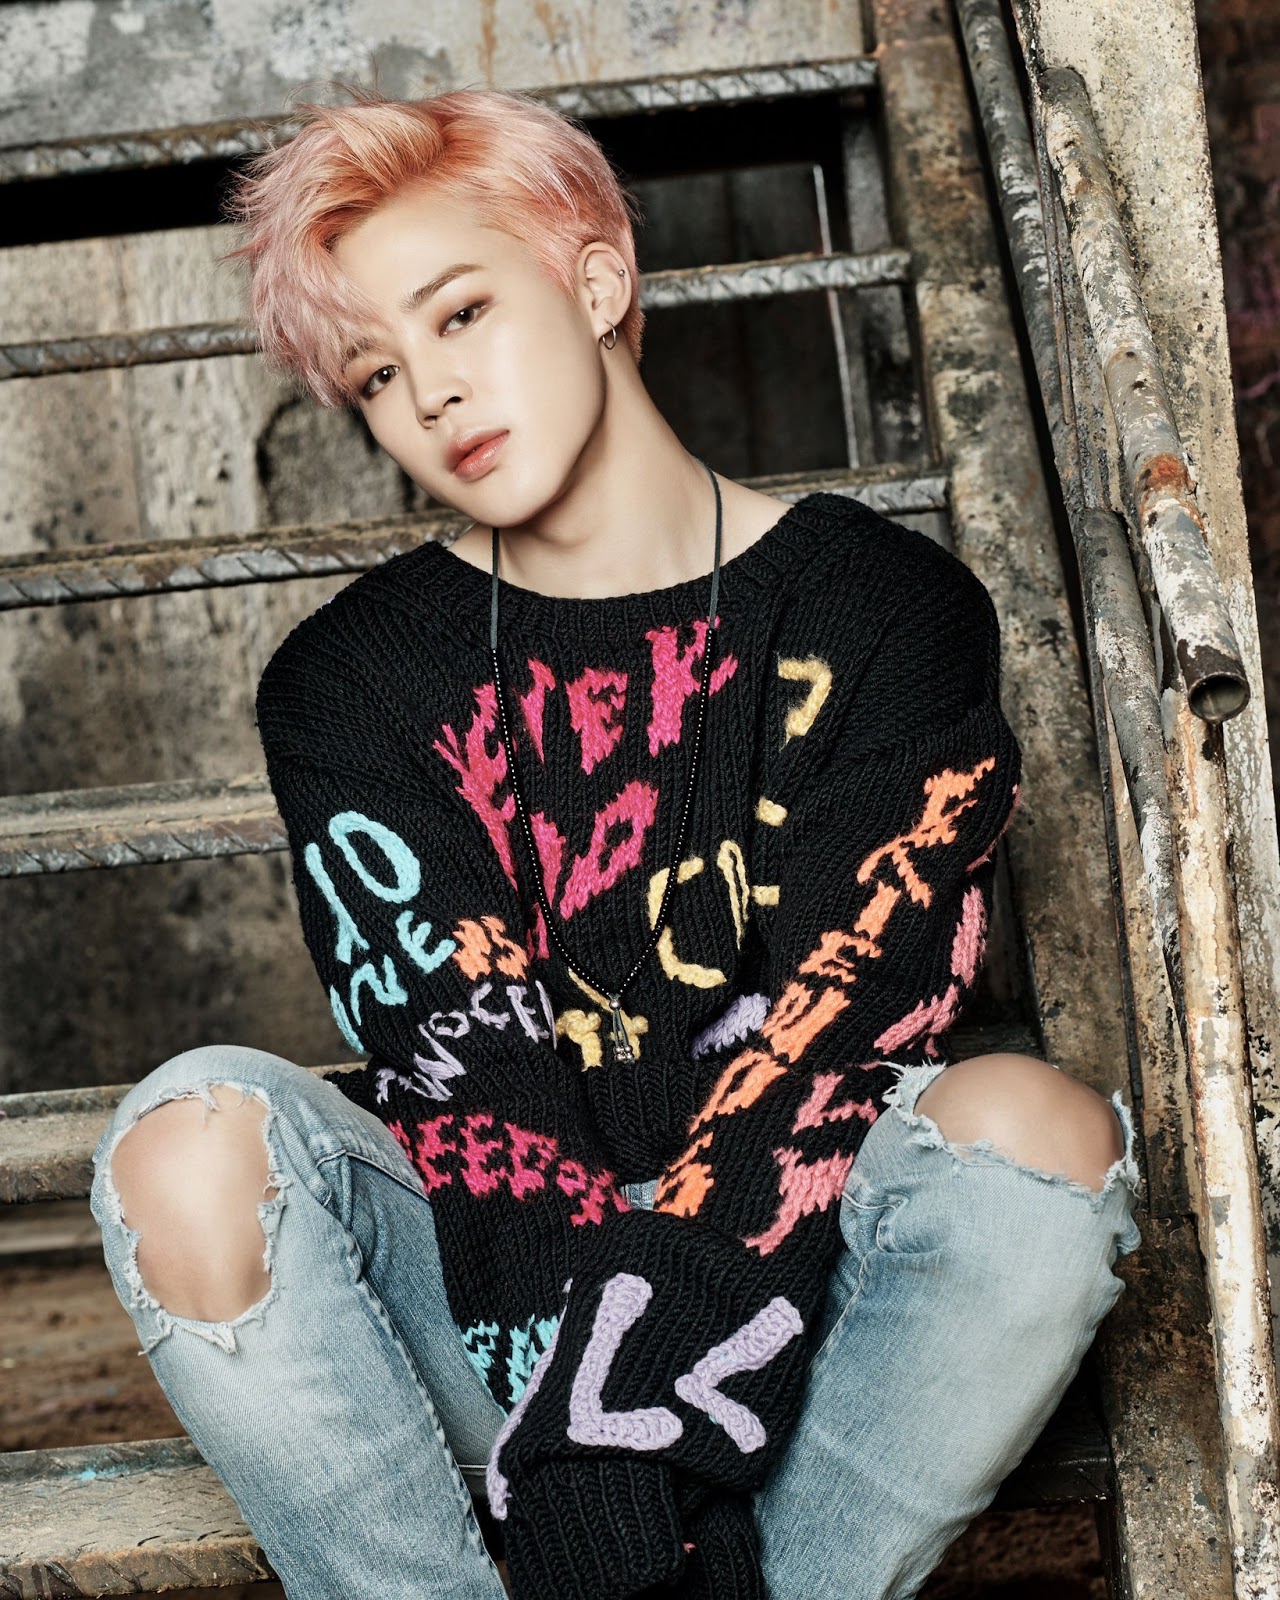  FULL HQ BTS  You  Never  Walk  Alone  concept teaser photos 